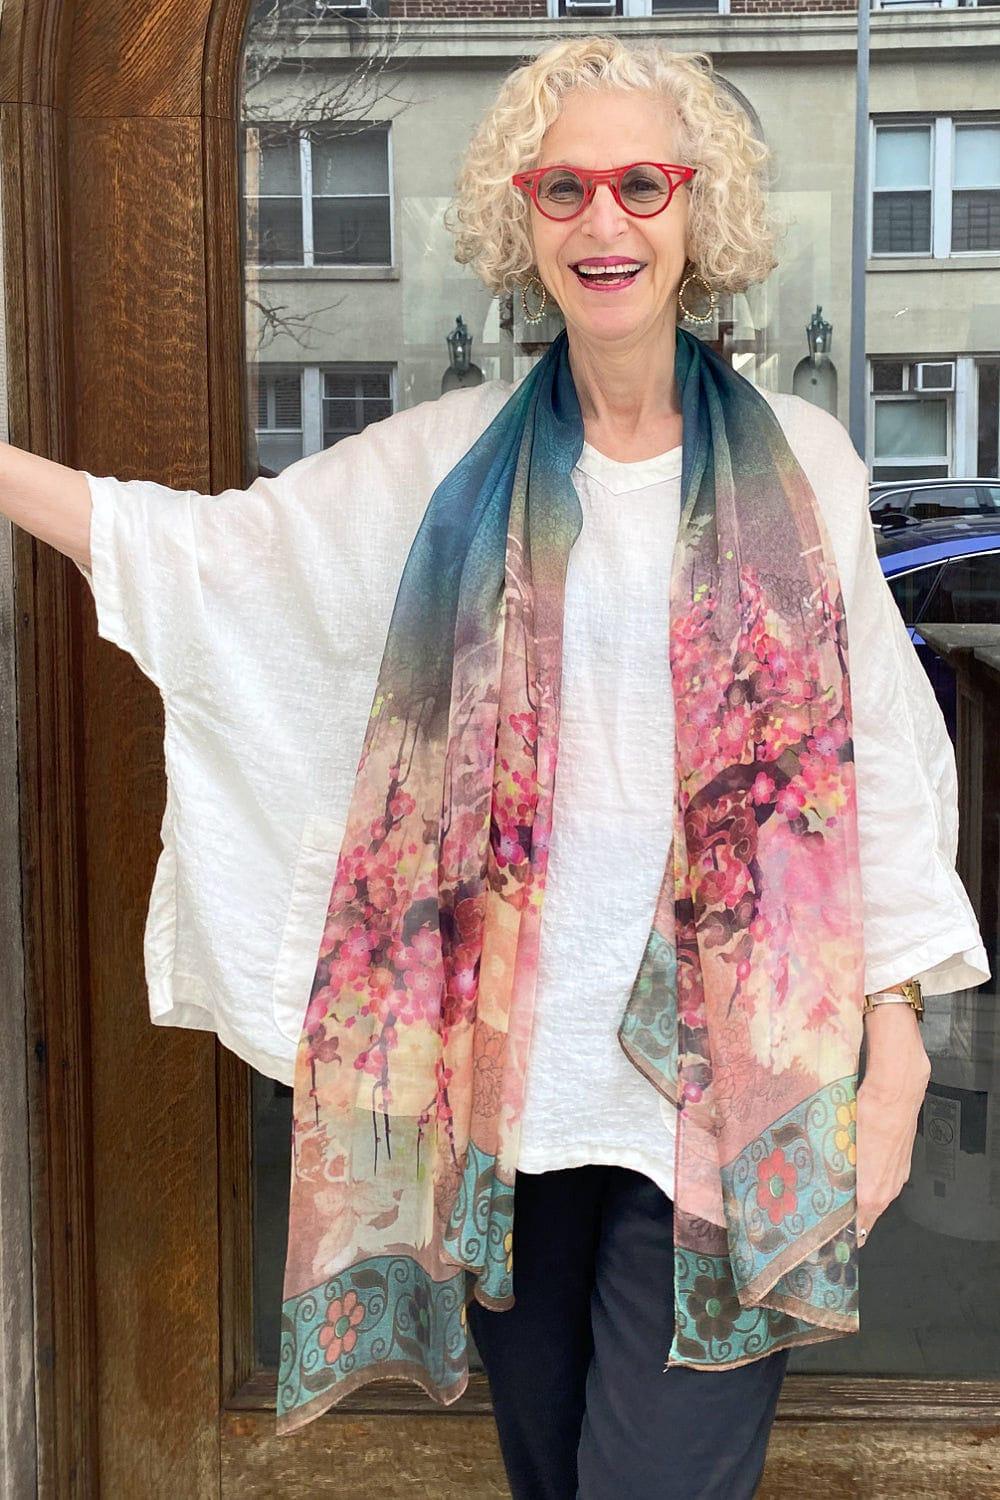 Sheer silk floral scarf colored with reds, pinks and teals, draped over the neck of a smiling woman over 60 years old. She is also wearing an oversized white linen top.